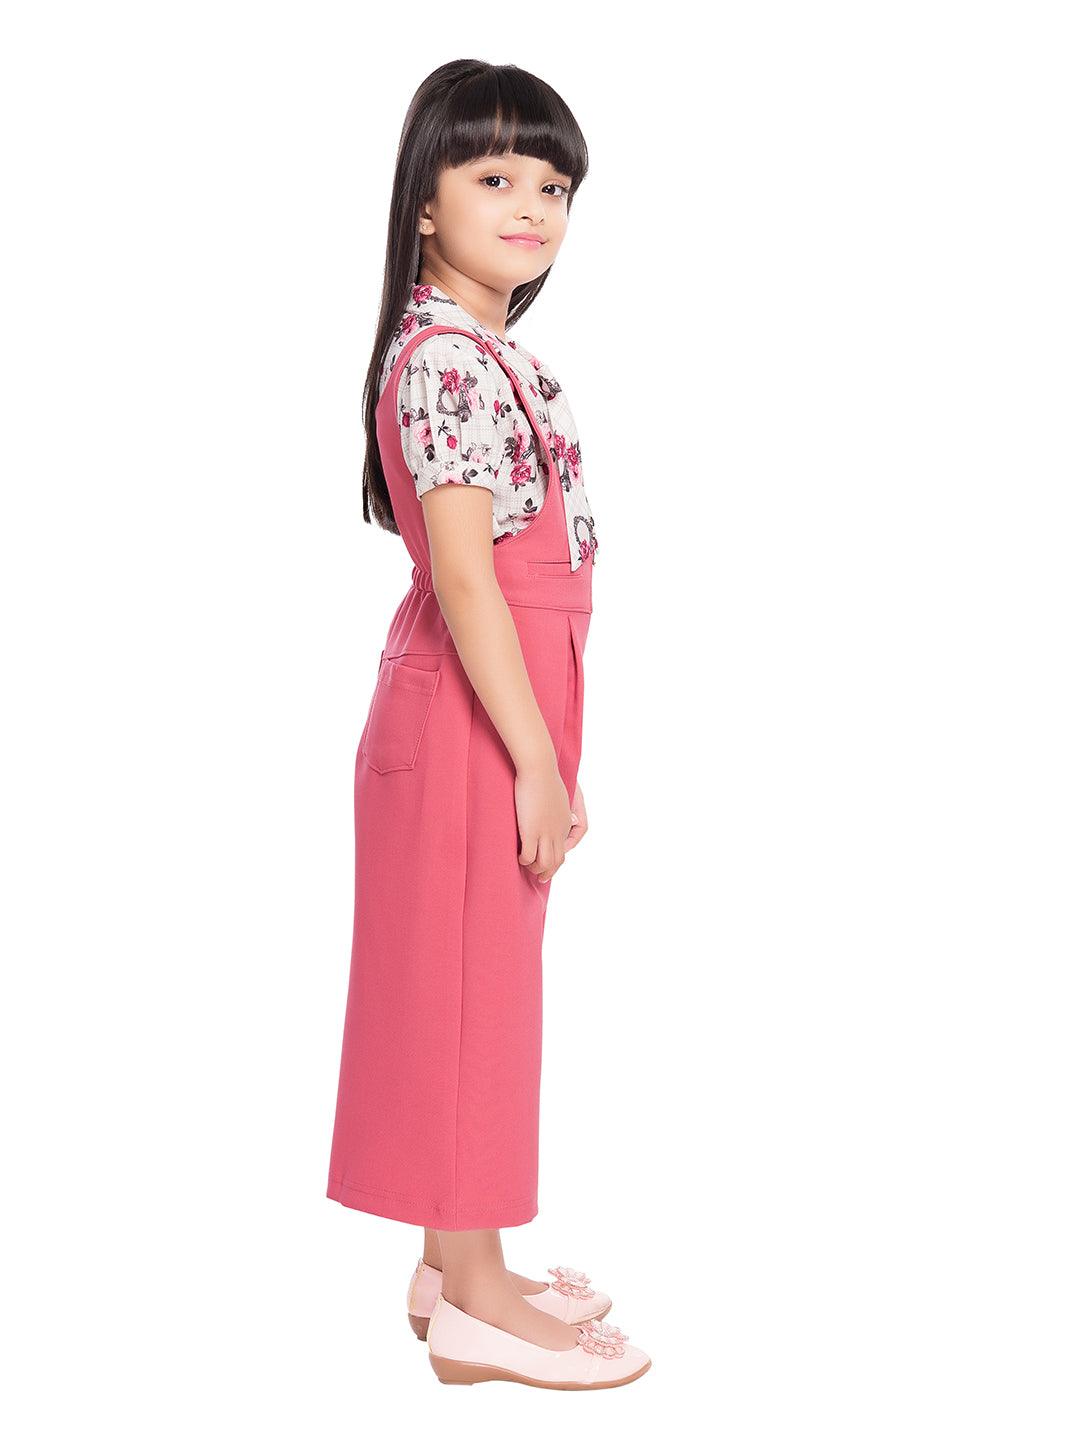 Onion Pink Coloured Culotte Jumpsuit  - 1845 Pink - TINY BABY INDIA shop.tinybaby.in